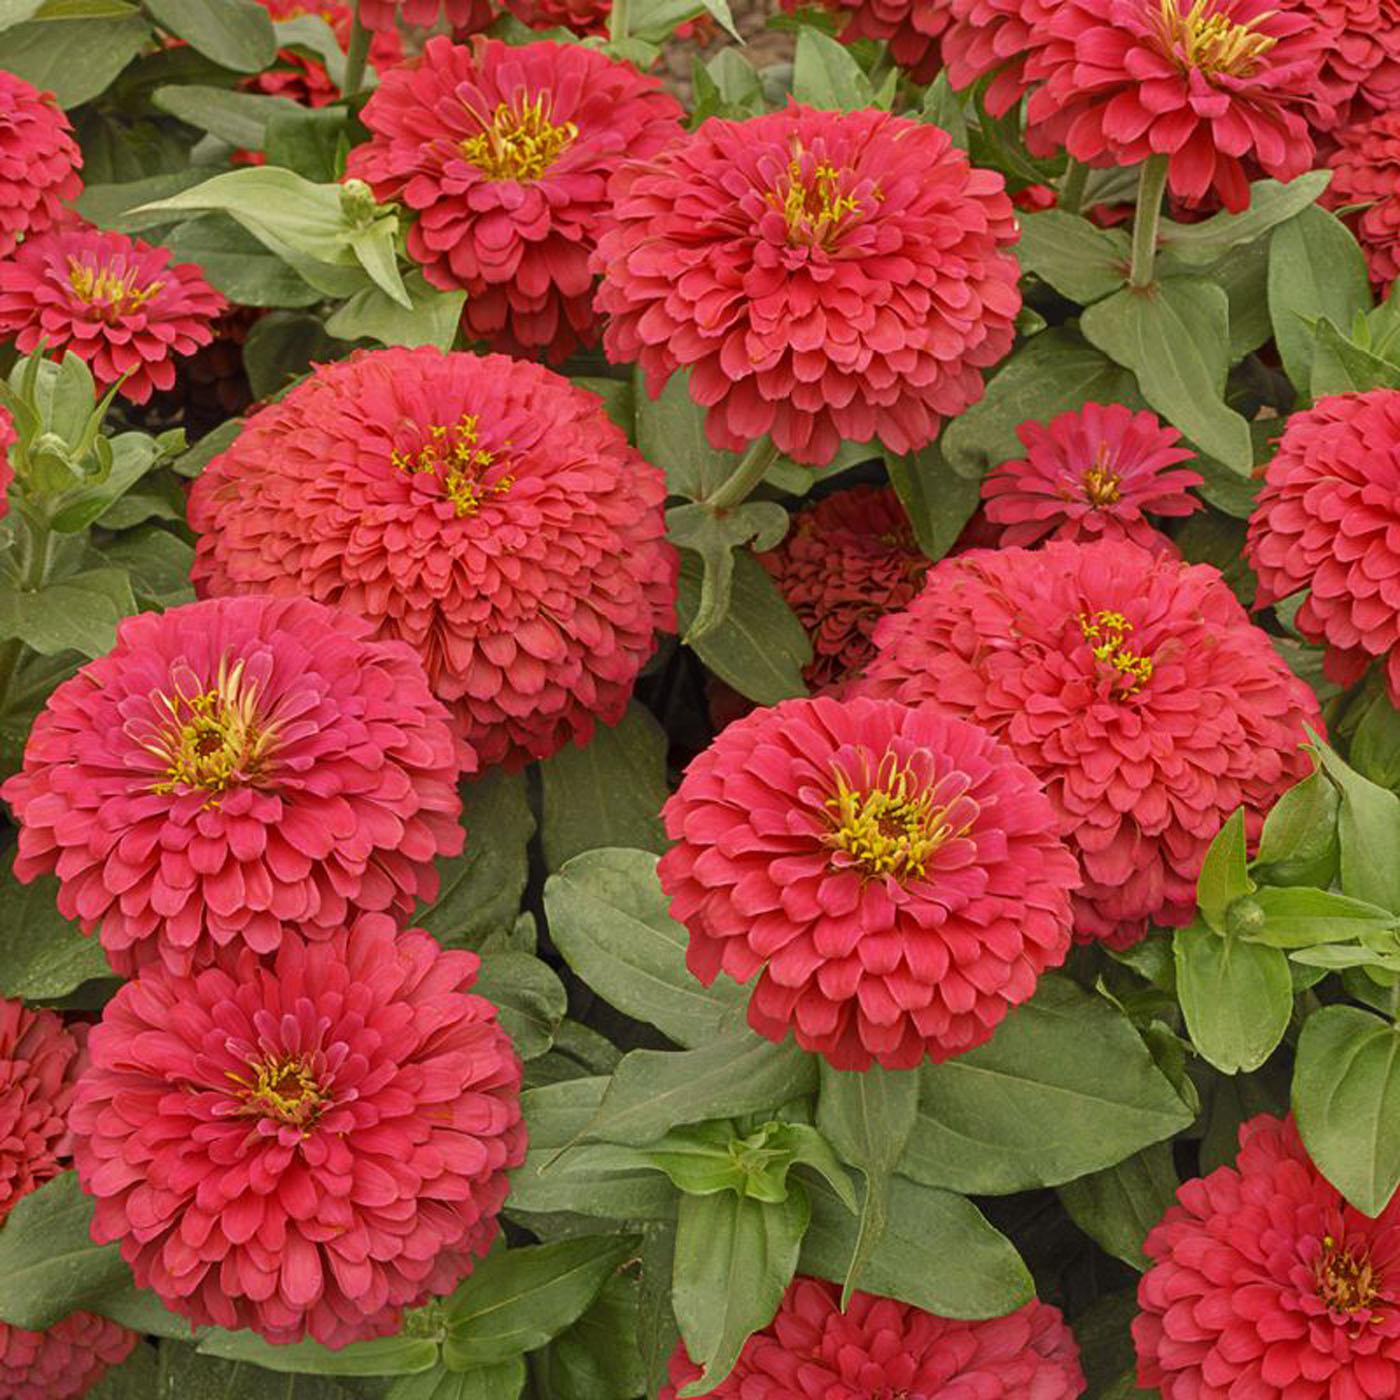 The Magellan zinnia produces enormous flowers that reach a whopping 6 inches in width. These bright, colorful flowers are produced on short, stocky plants that reach 18 inches tall.